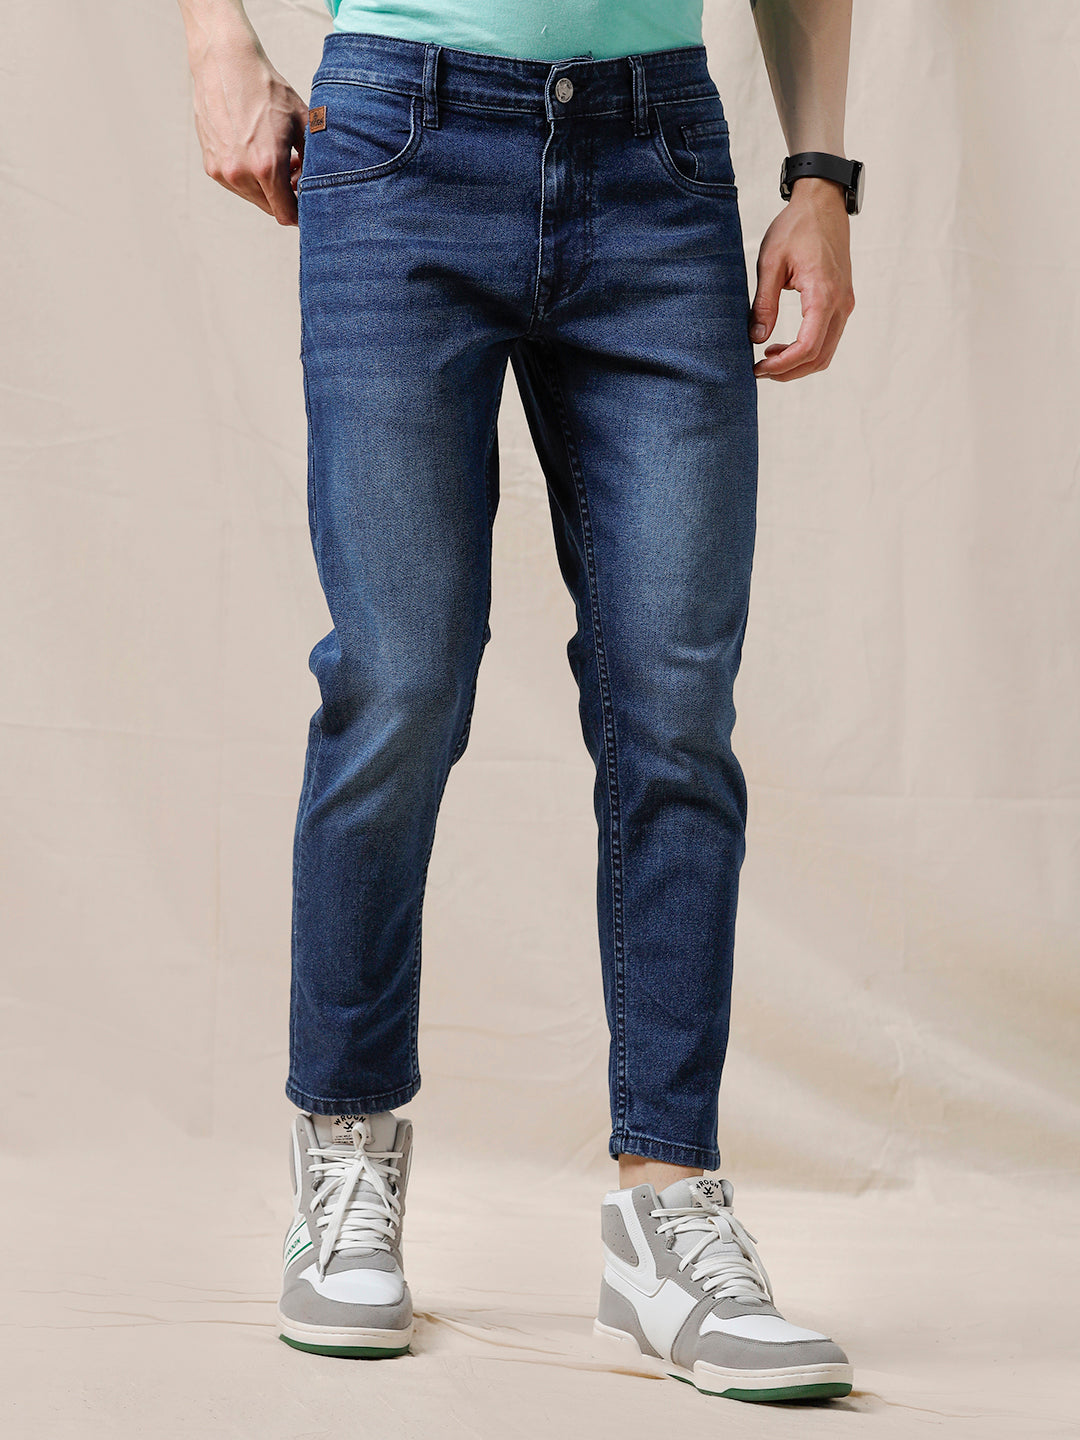 Urban Trend Faded Jeans